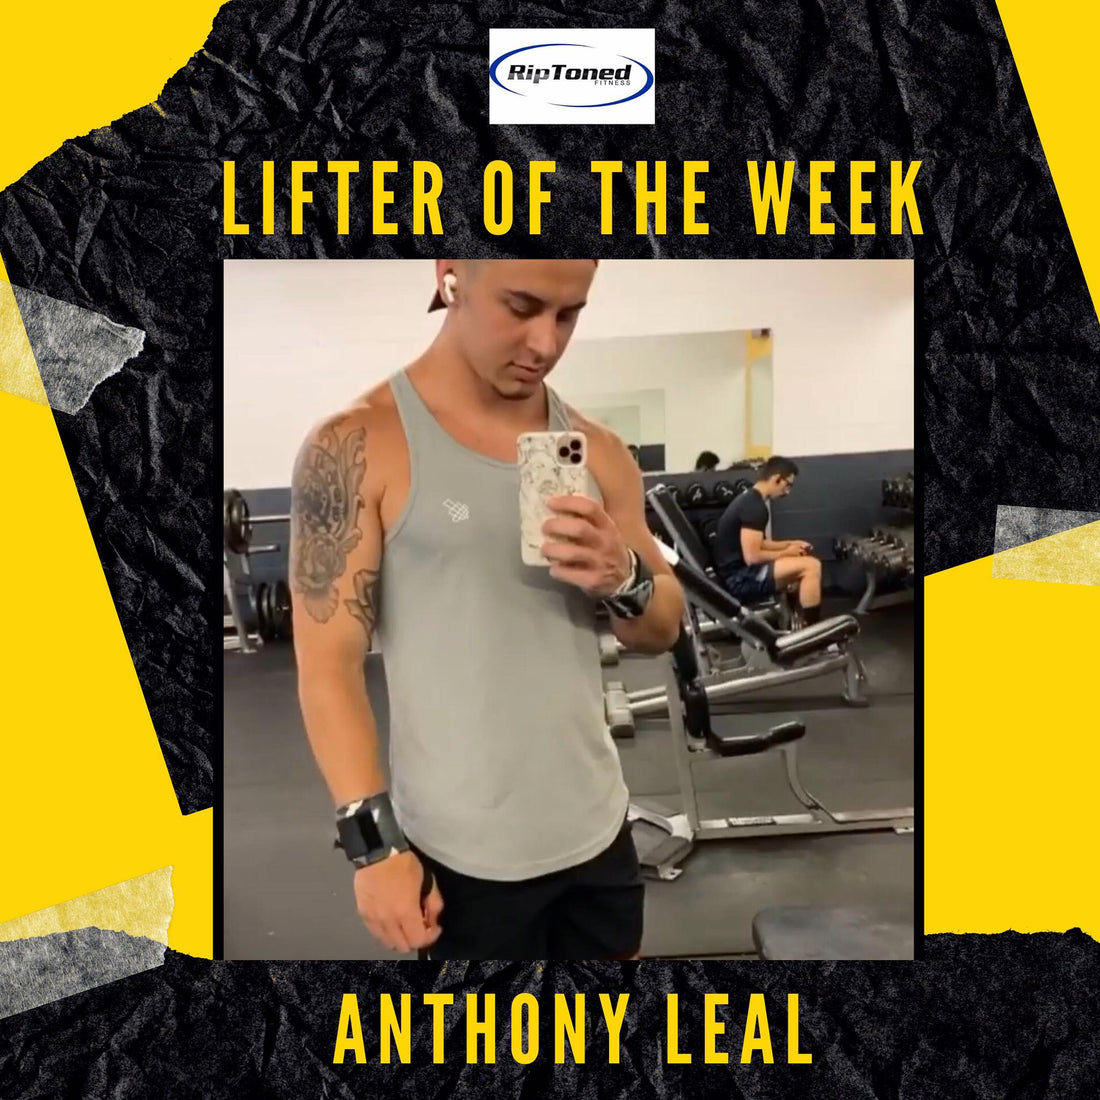 Lifter of the Week - Anthony Leal - Rip Toned